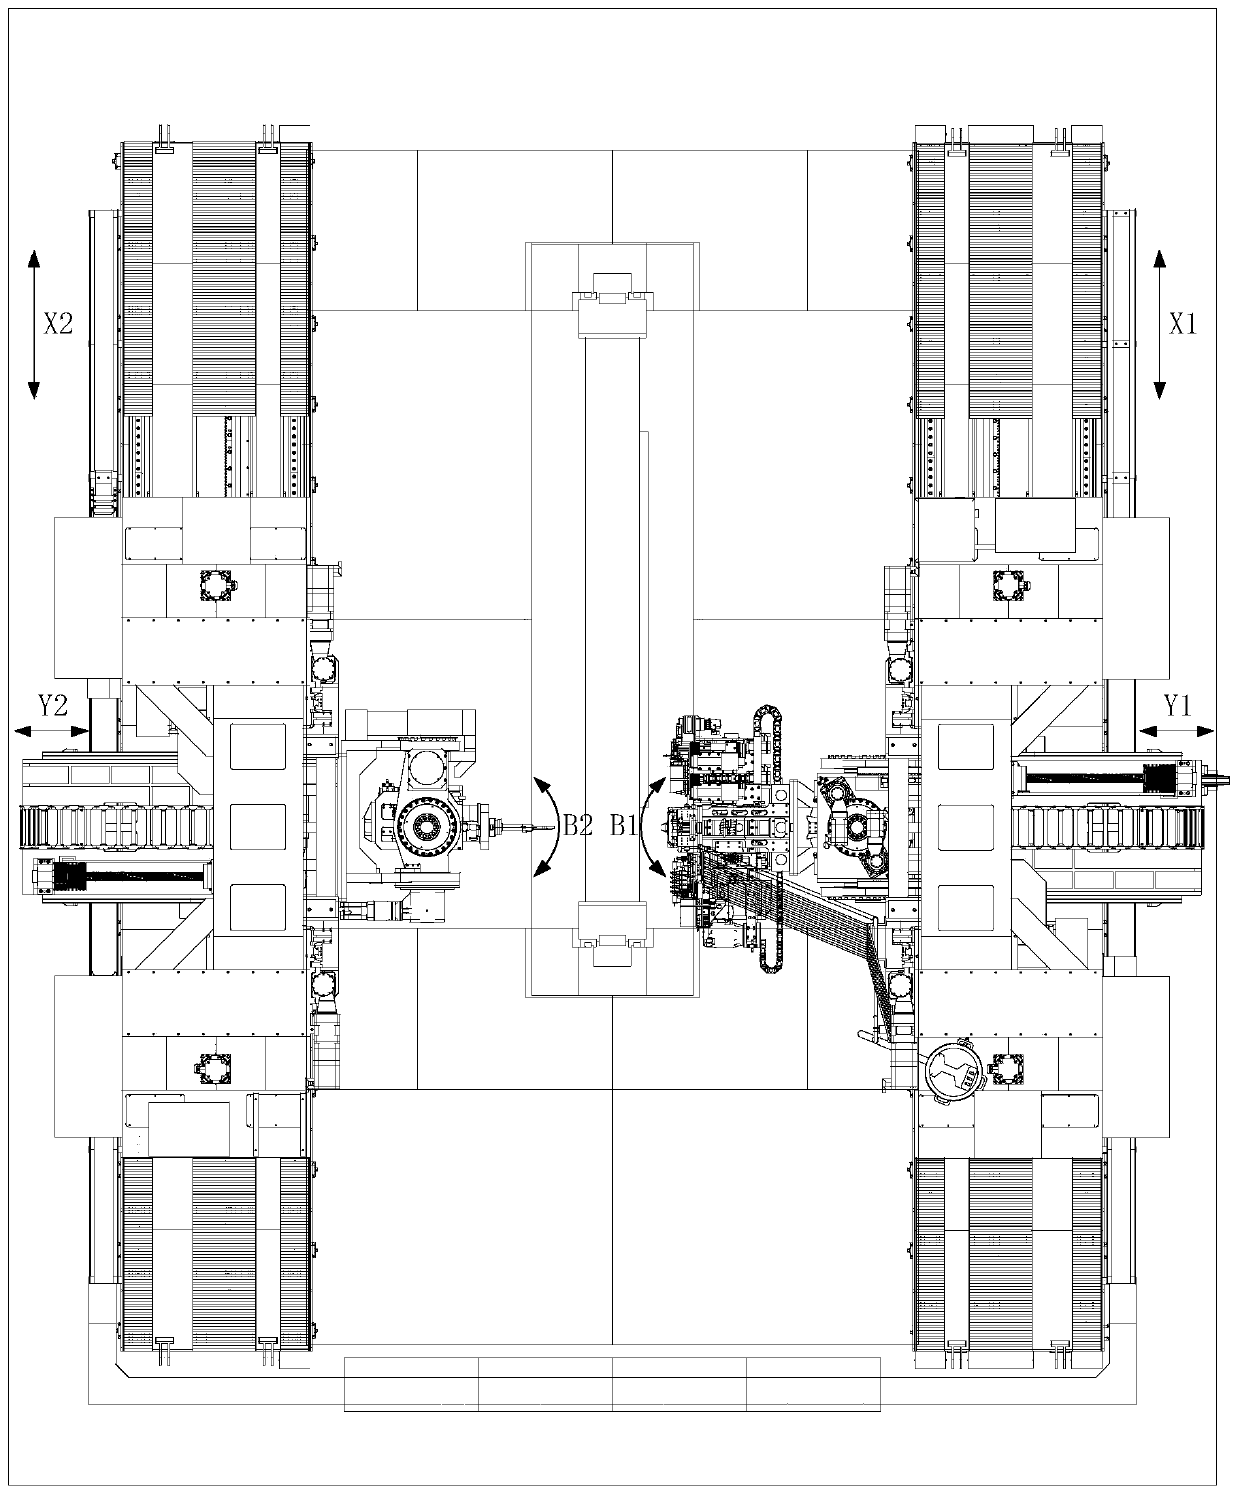 A motion parameter identification method for an aircraft panel horizontal automatic drilling and riveting machine